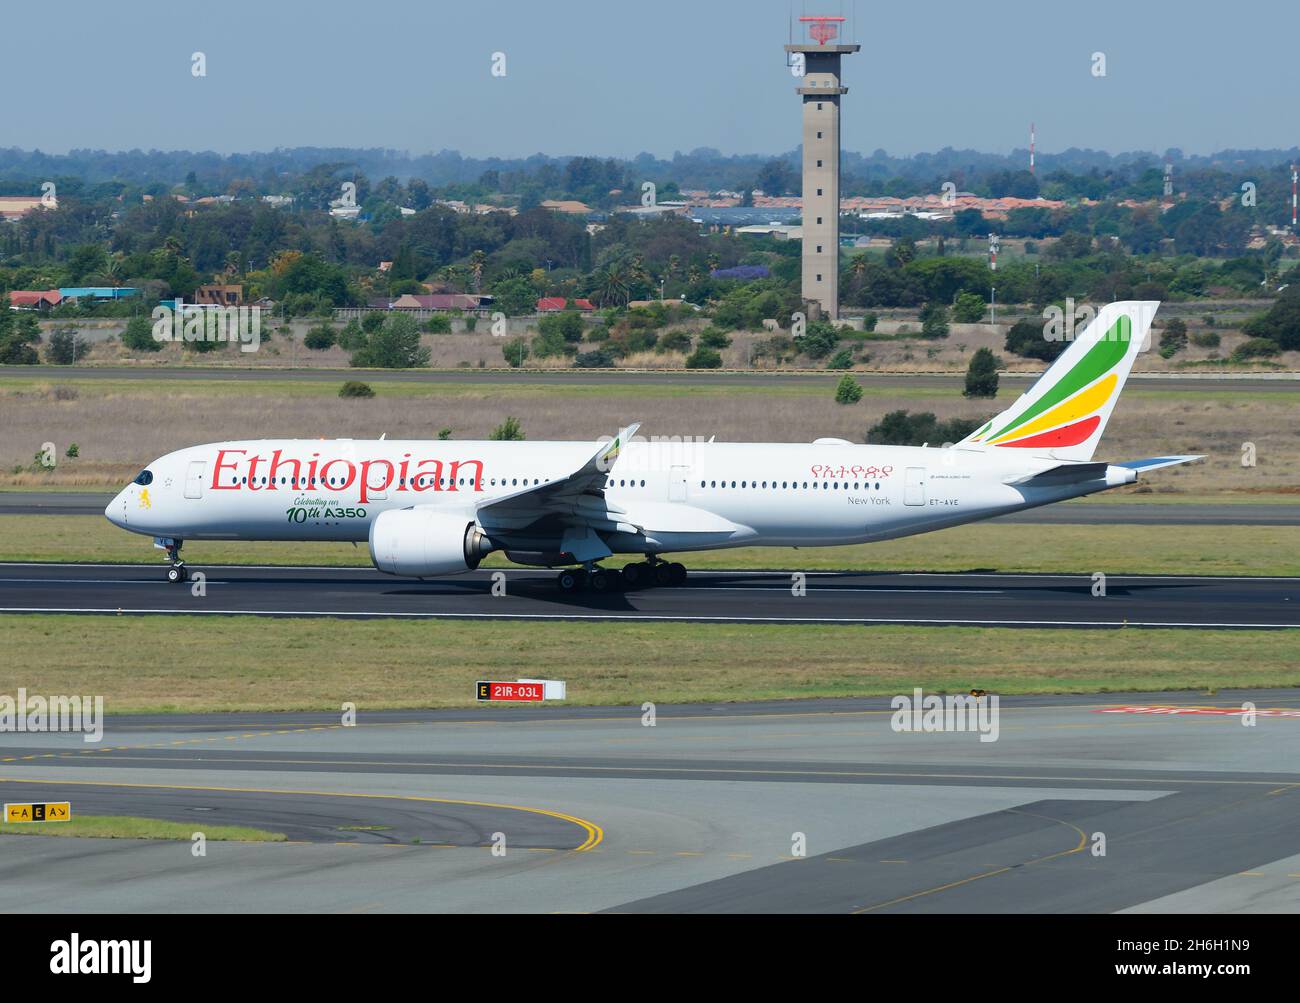 Ethiopian Airlines Airbus A350-900 airplane with special decal celebrating the 10th A350 aircraft of the airline departing Johannesburg, South Africa. Stock Photo